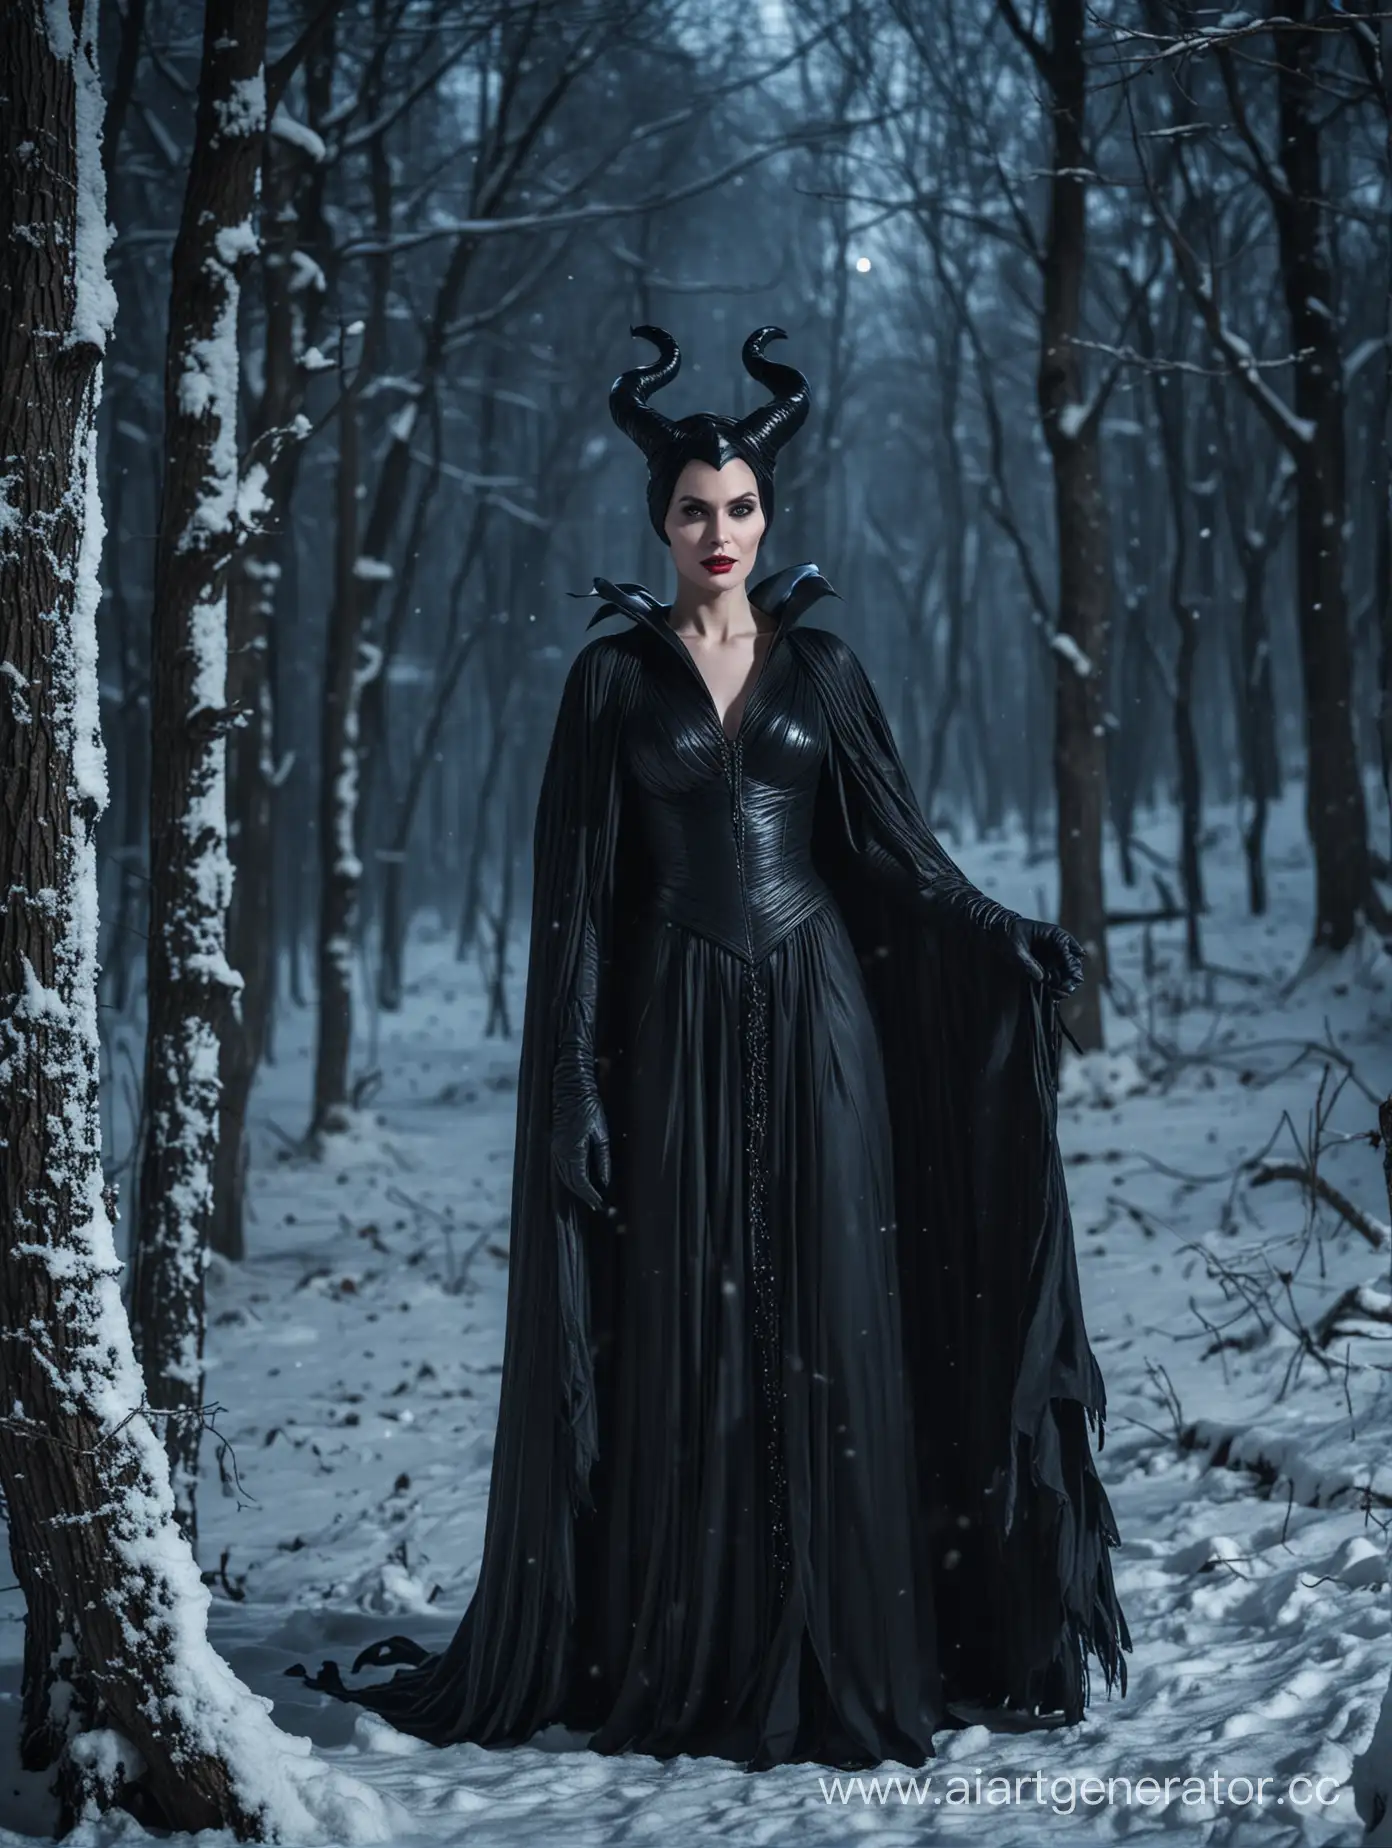 Maleficent-Stands-Majestic-in-Snowy-Winter-Forest-at-Night